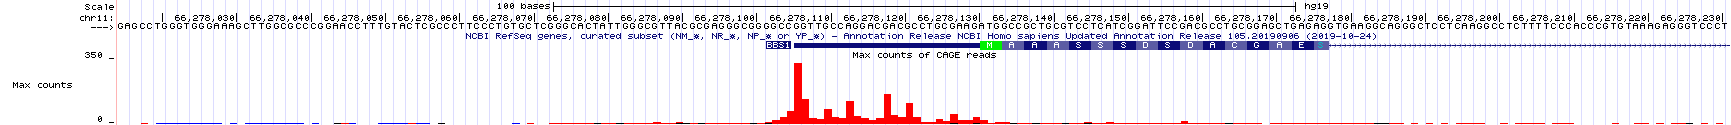 A close up view of the TSS-seq histogram data surrounding the predicted **transcriptional** start site for BBS1 (as defined by the NCBI refseq evidence track). The **translational** start site of BBS1 is shown in green.